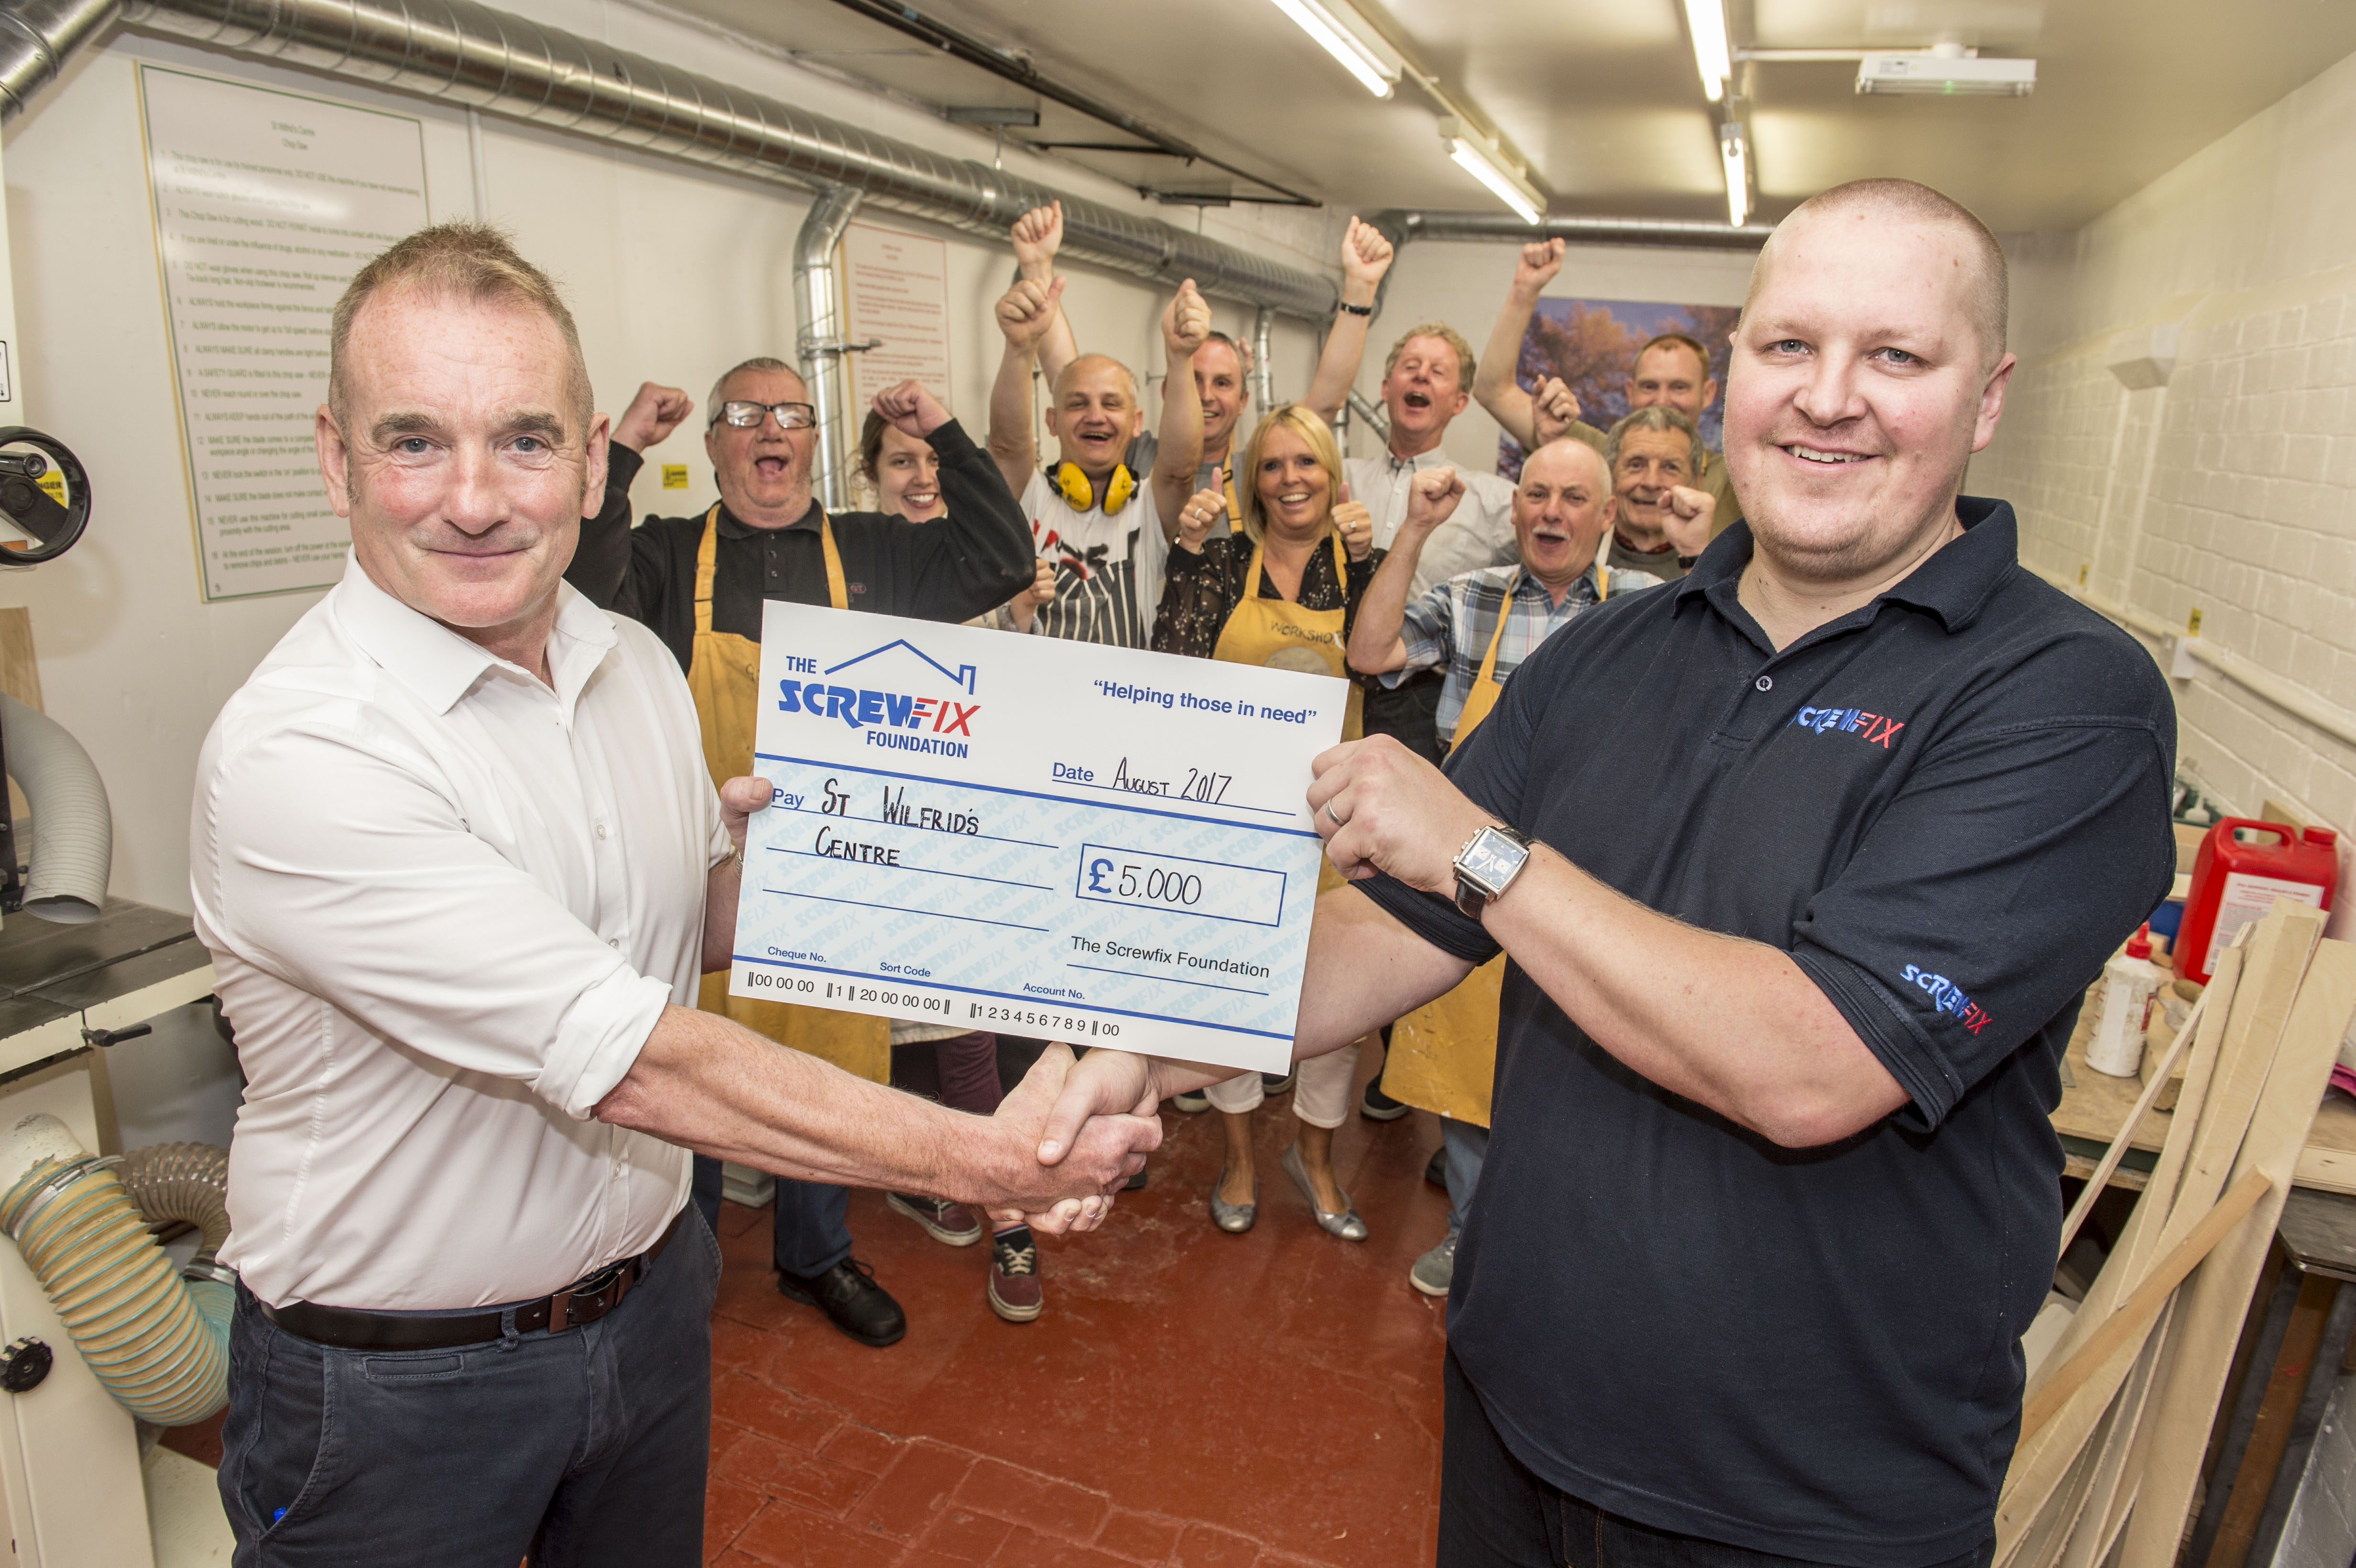 St Wilfrid’s Centre Receives Generous Donation From The Screwfix Foundation